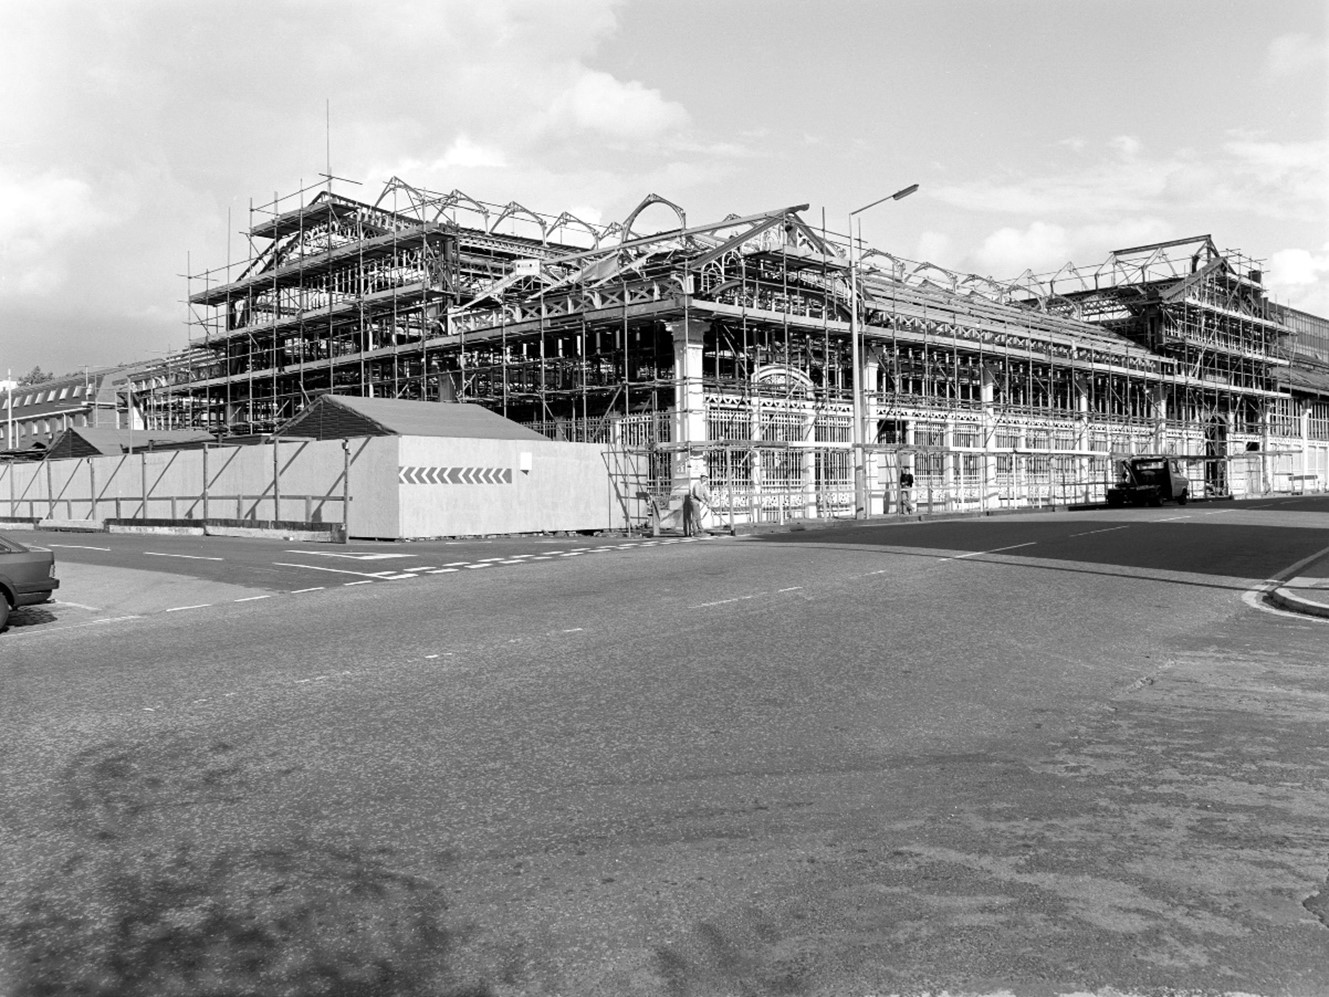 Black and white photo of an old market hall being renovated